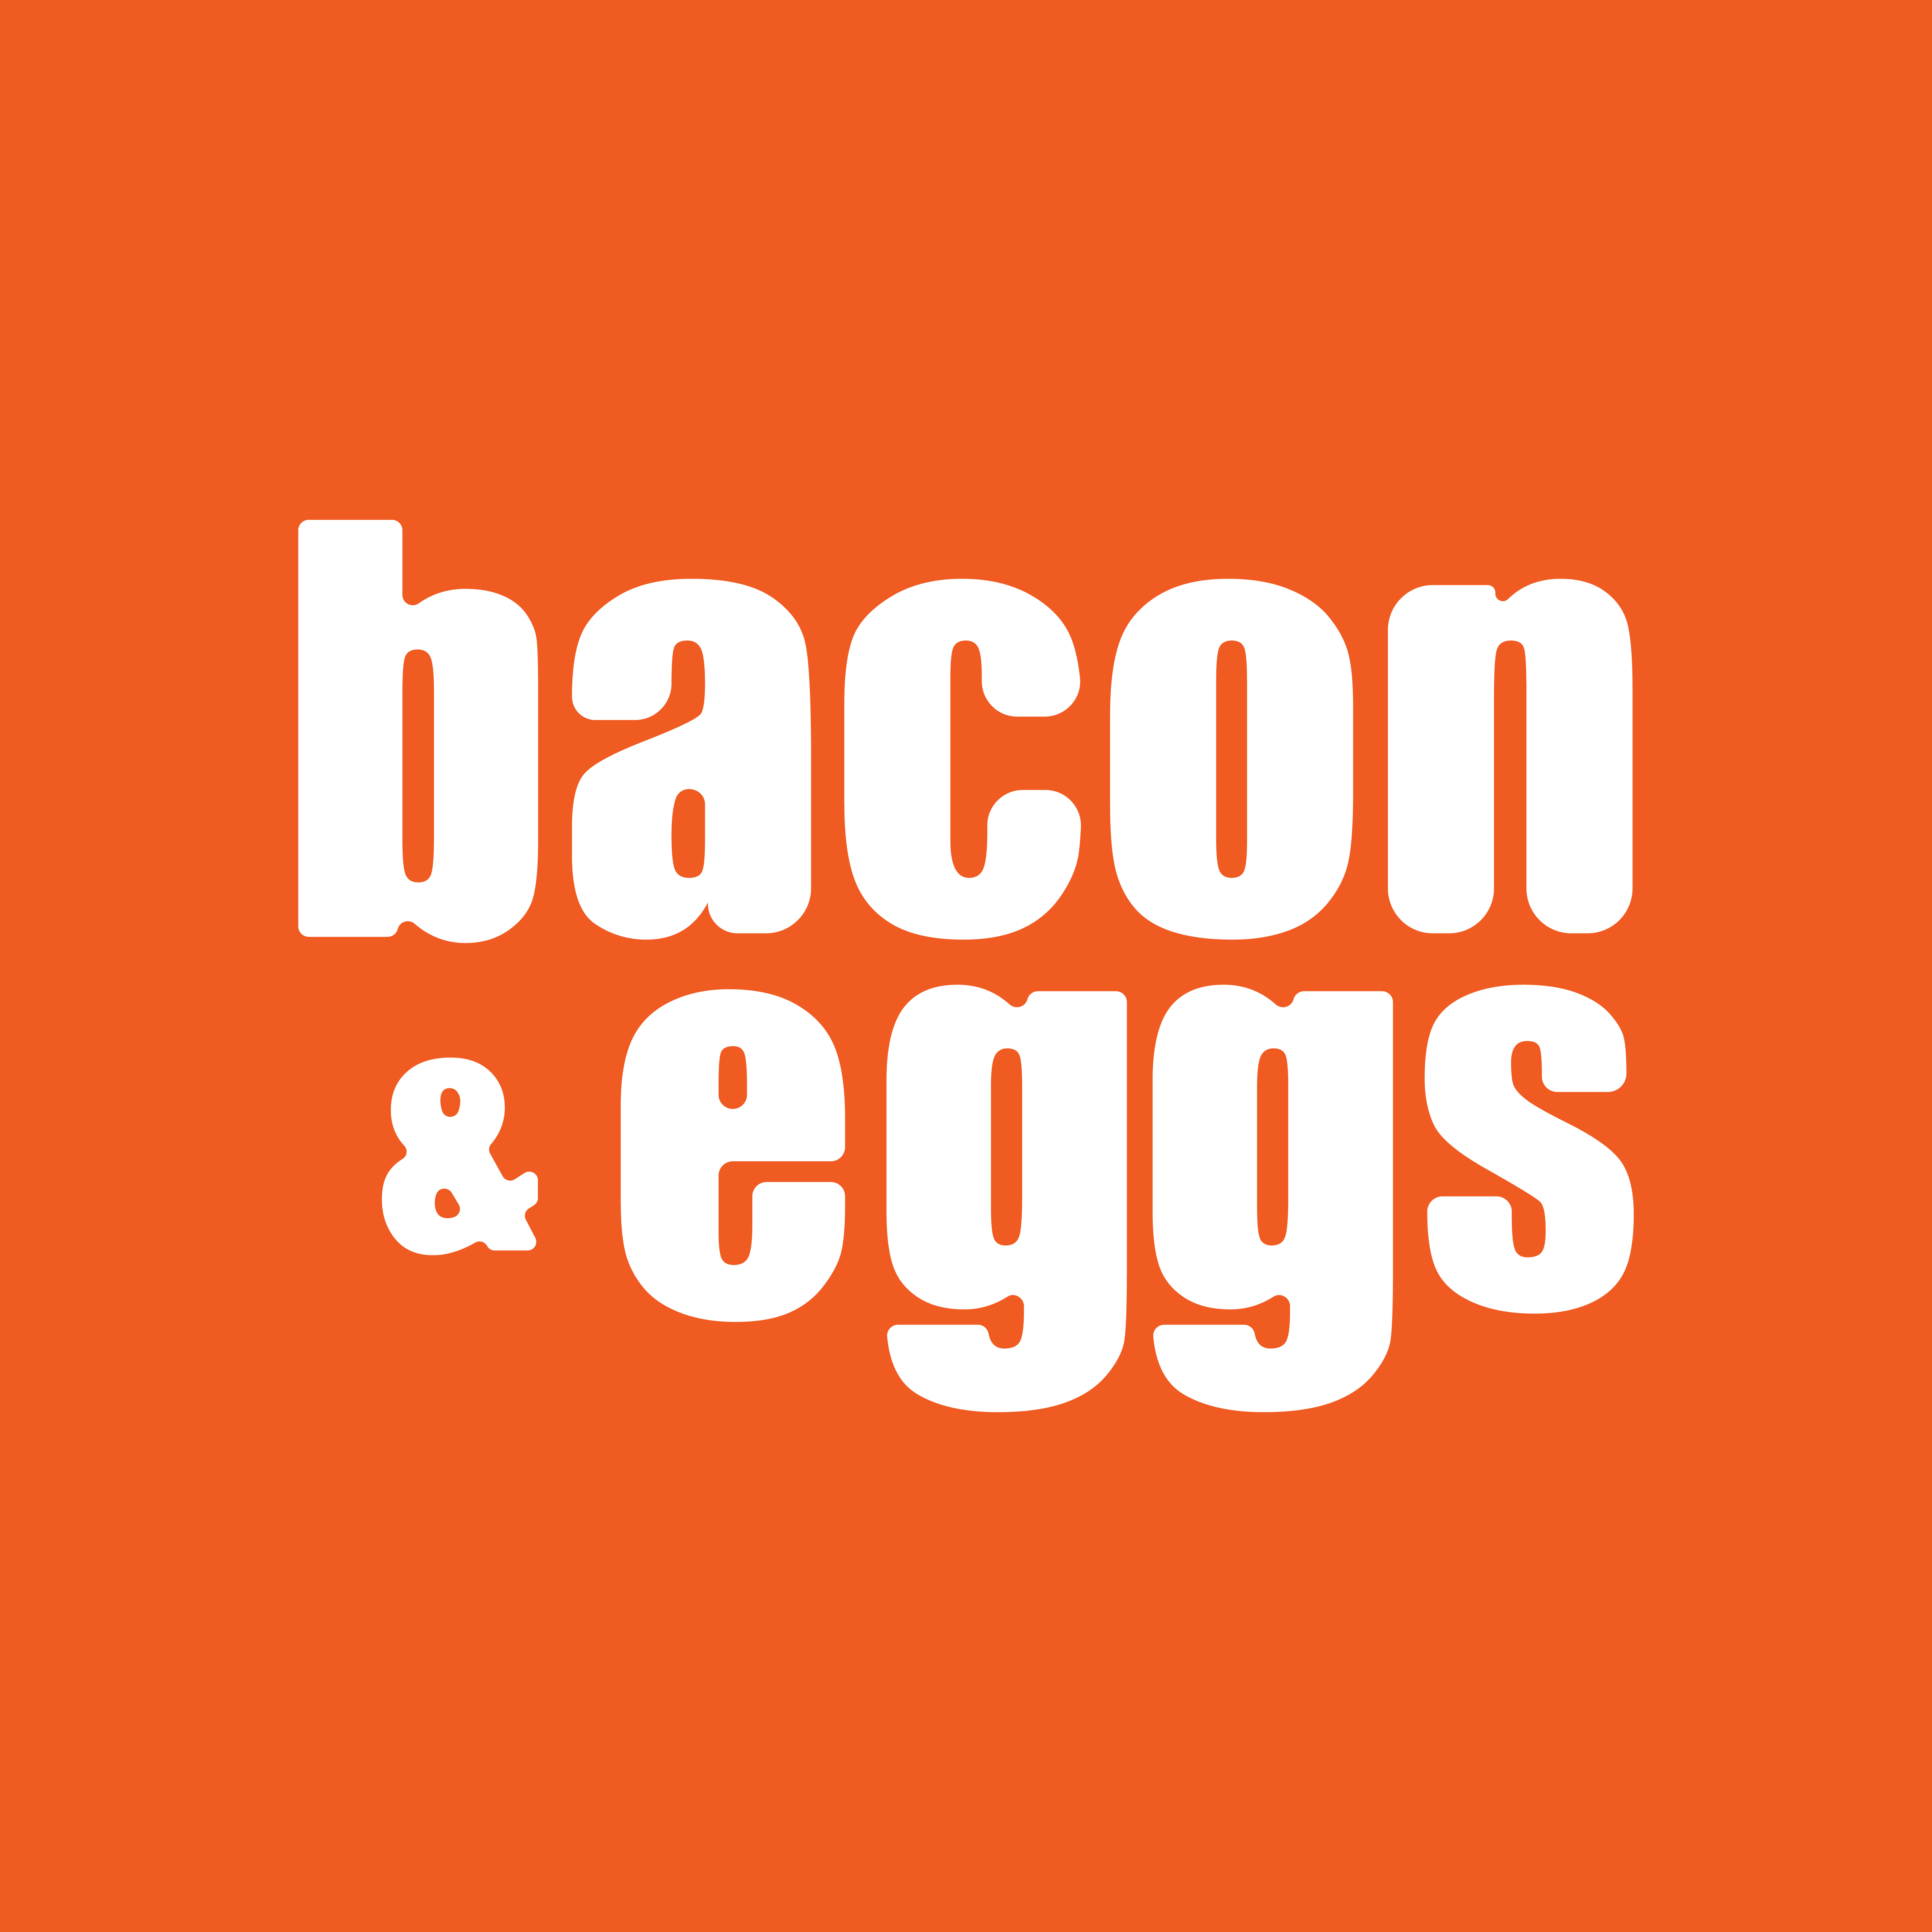 Bacon and Eggs: A Movie Lover's Podcast